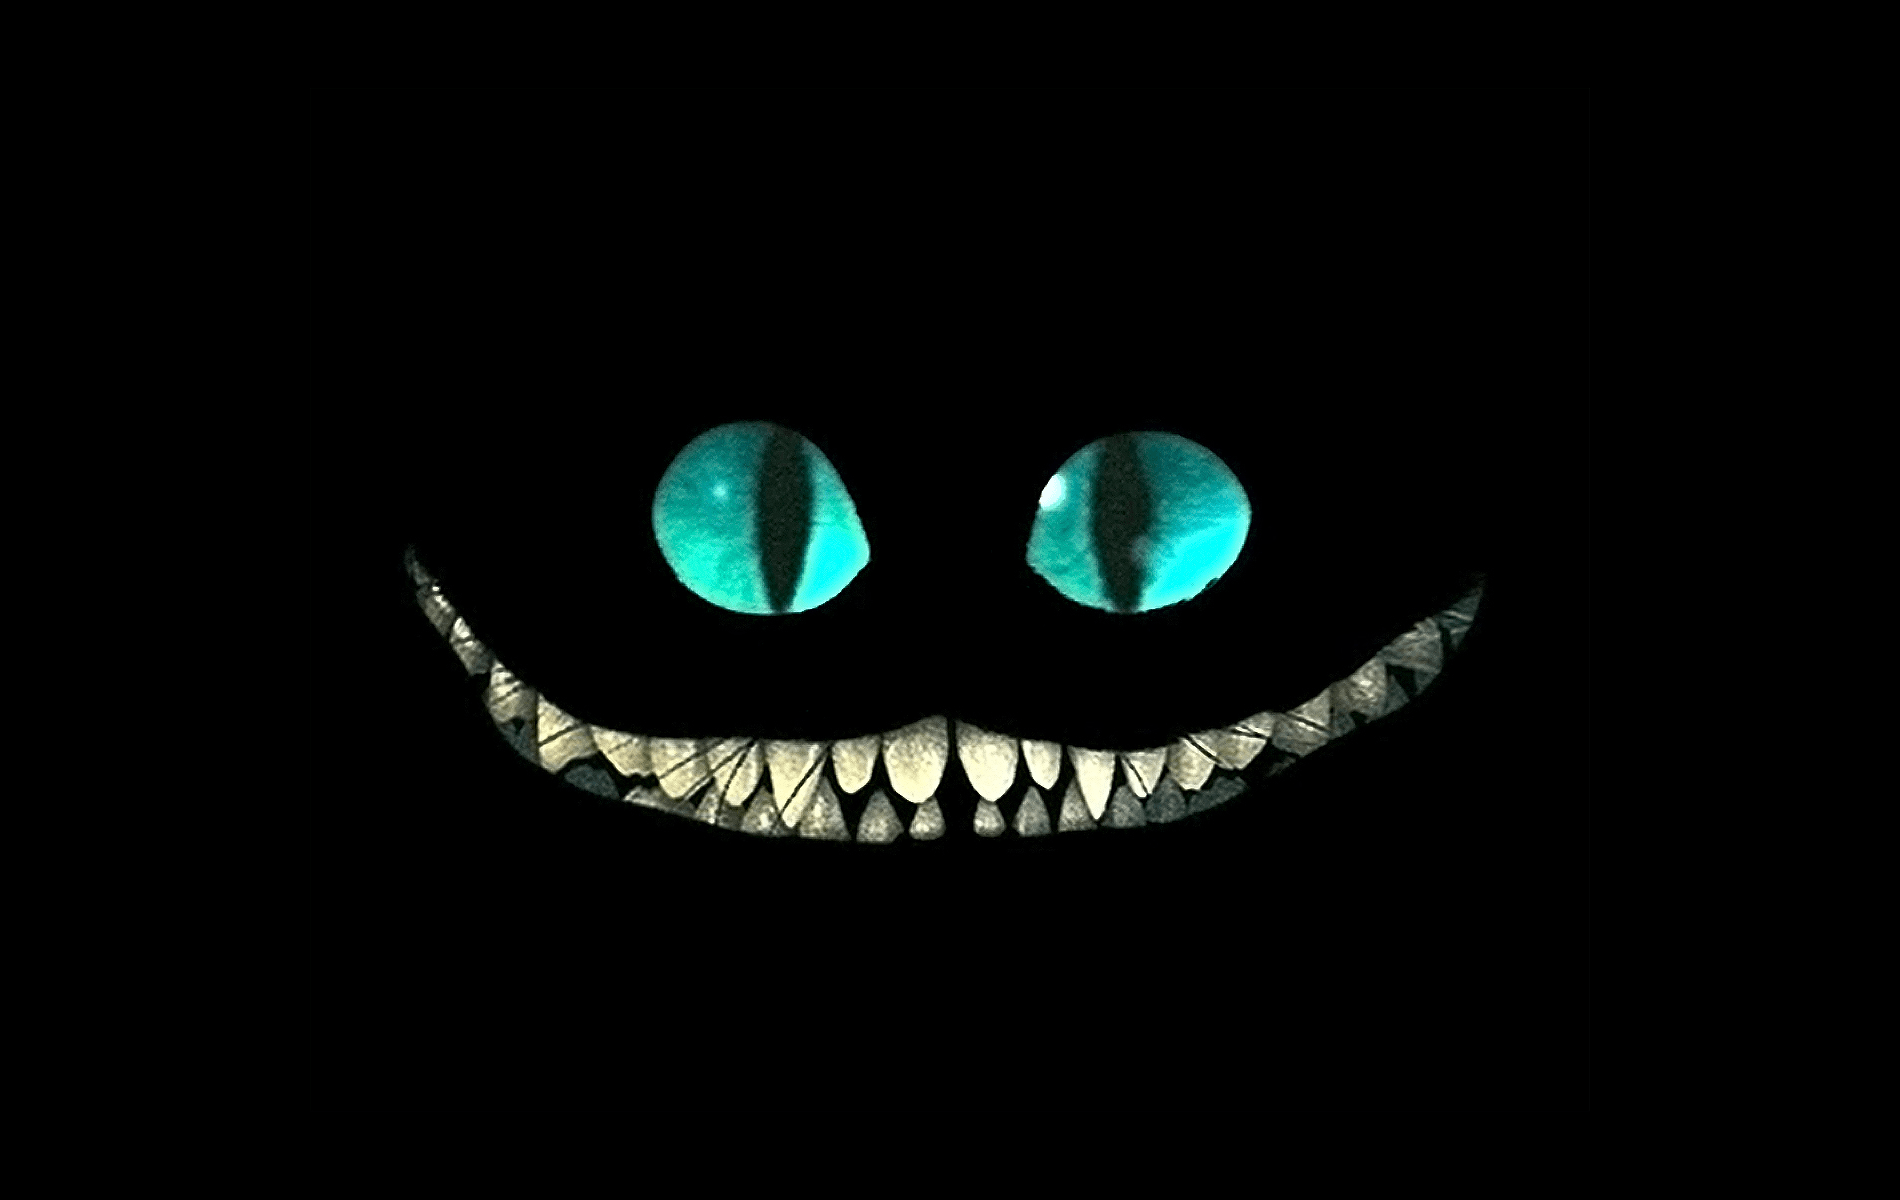 Cheshire Cat Wallpapers - Wallpaper Cave